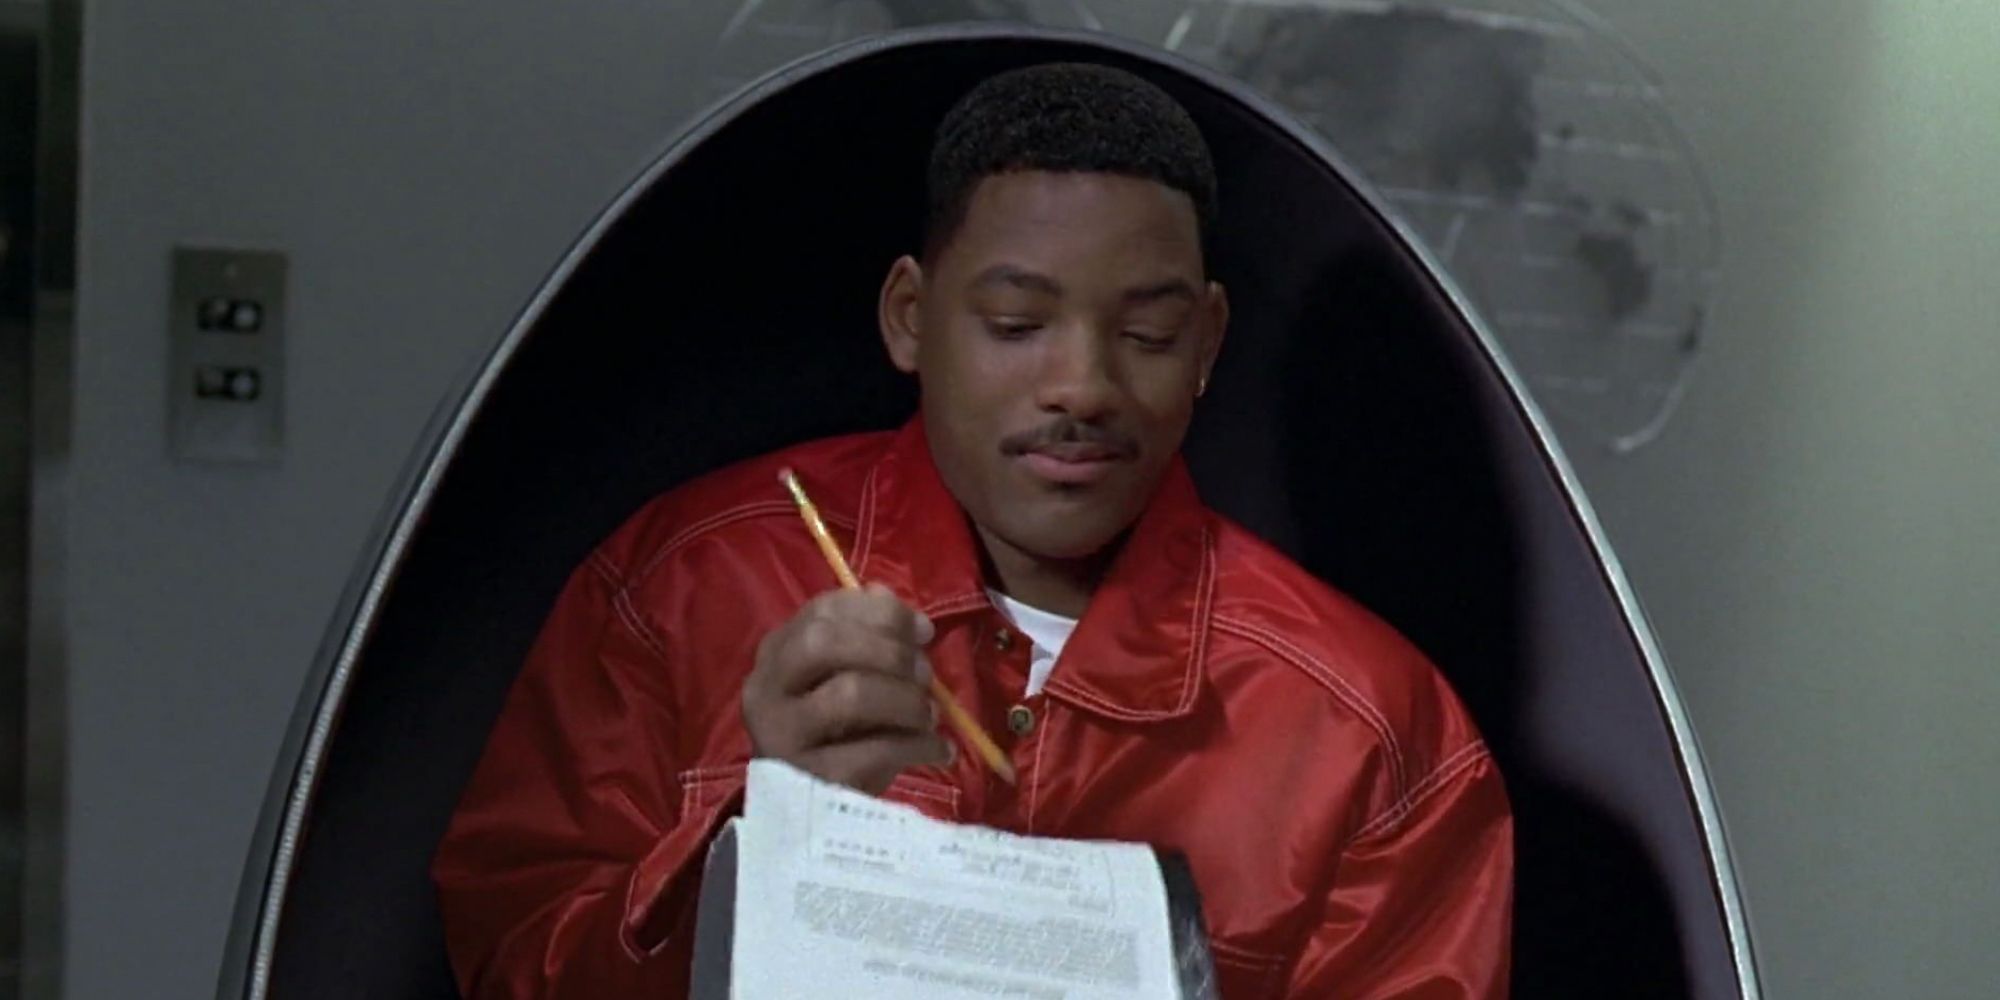 Jay breaking his pencil while taking a test in Men In Black